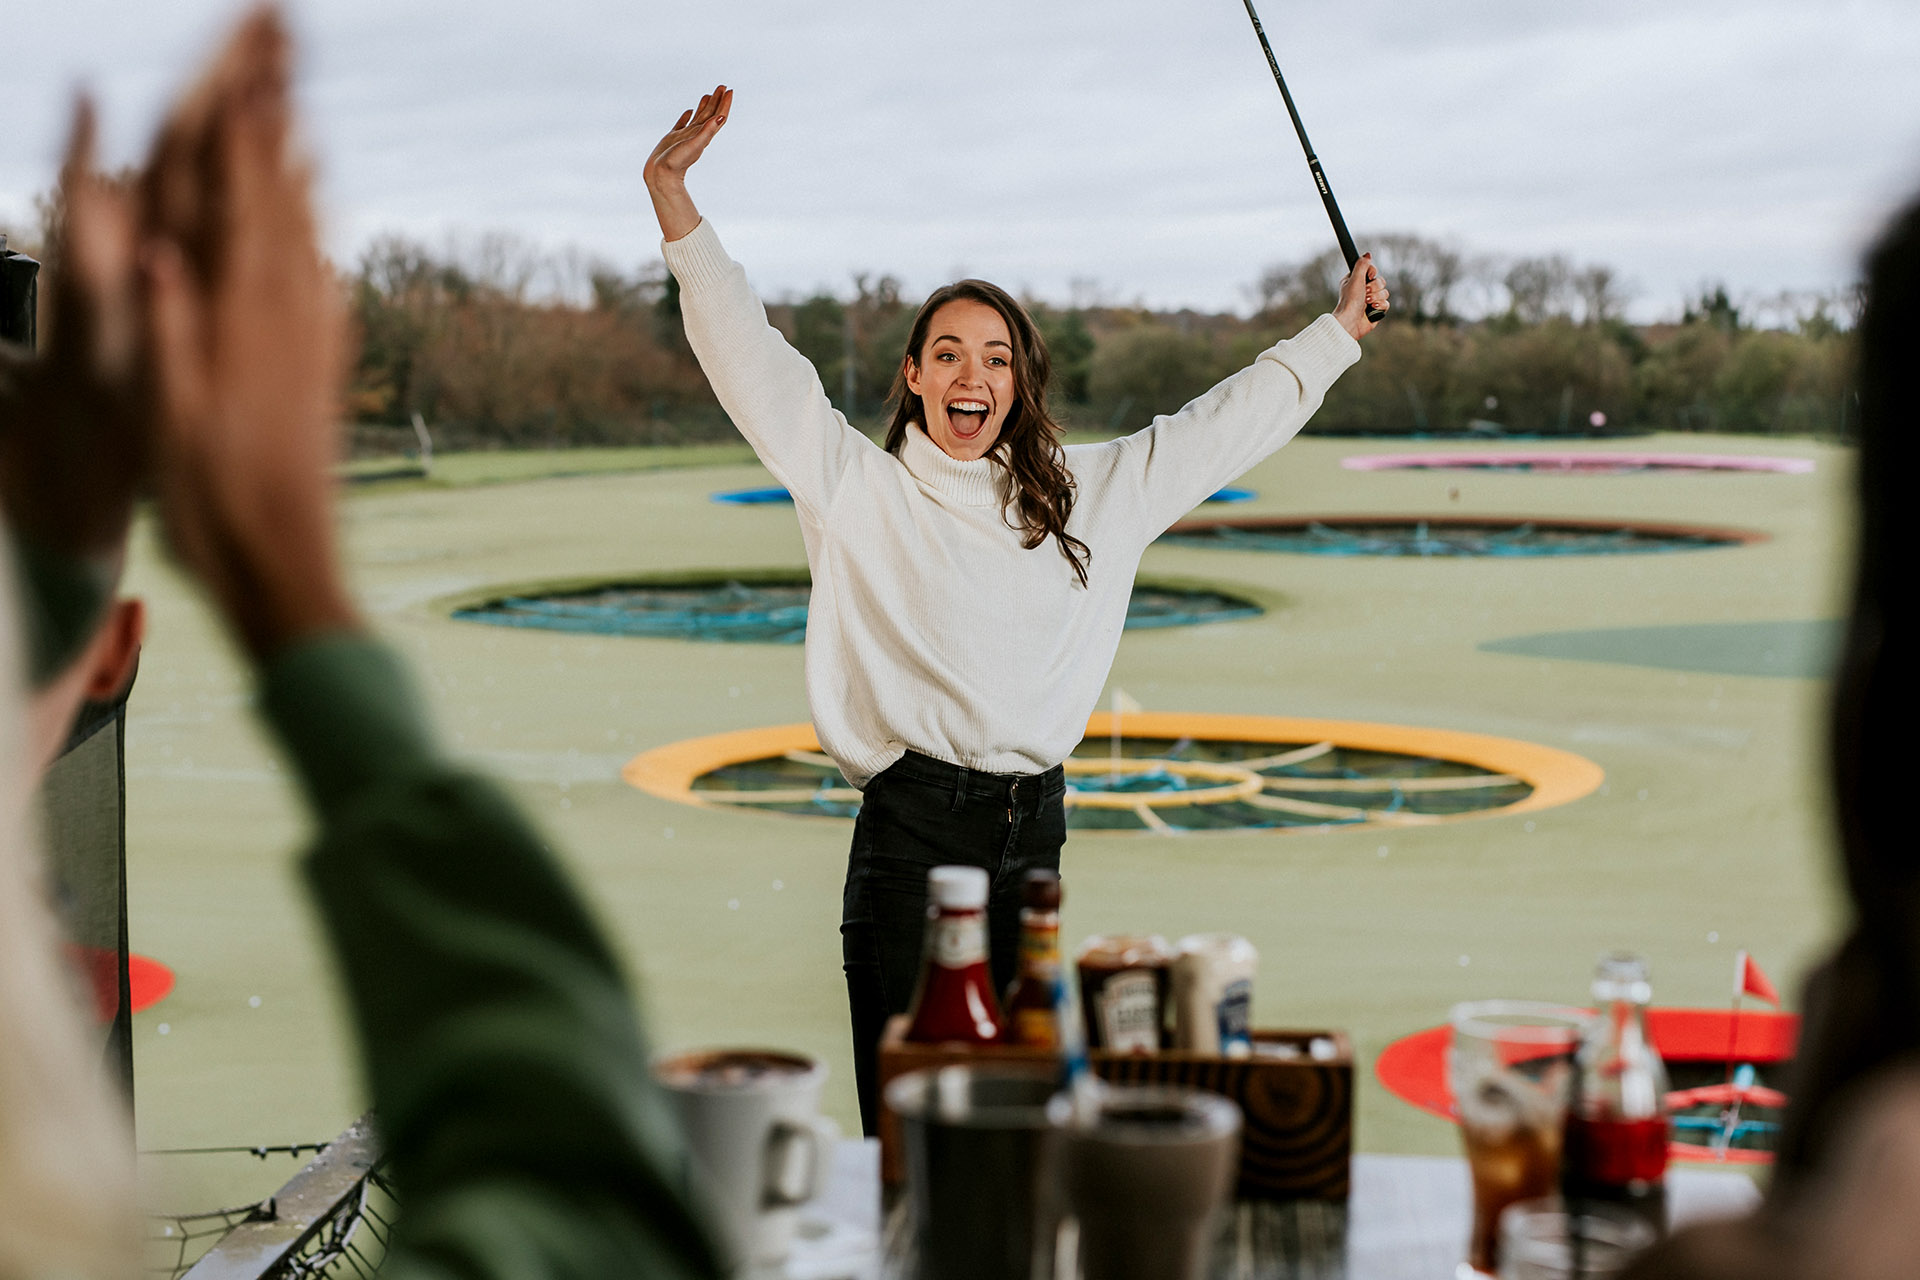 Hacking the system: How to beat your mates at Topgolf